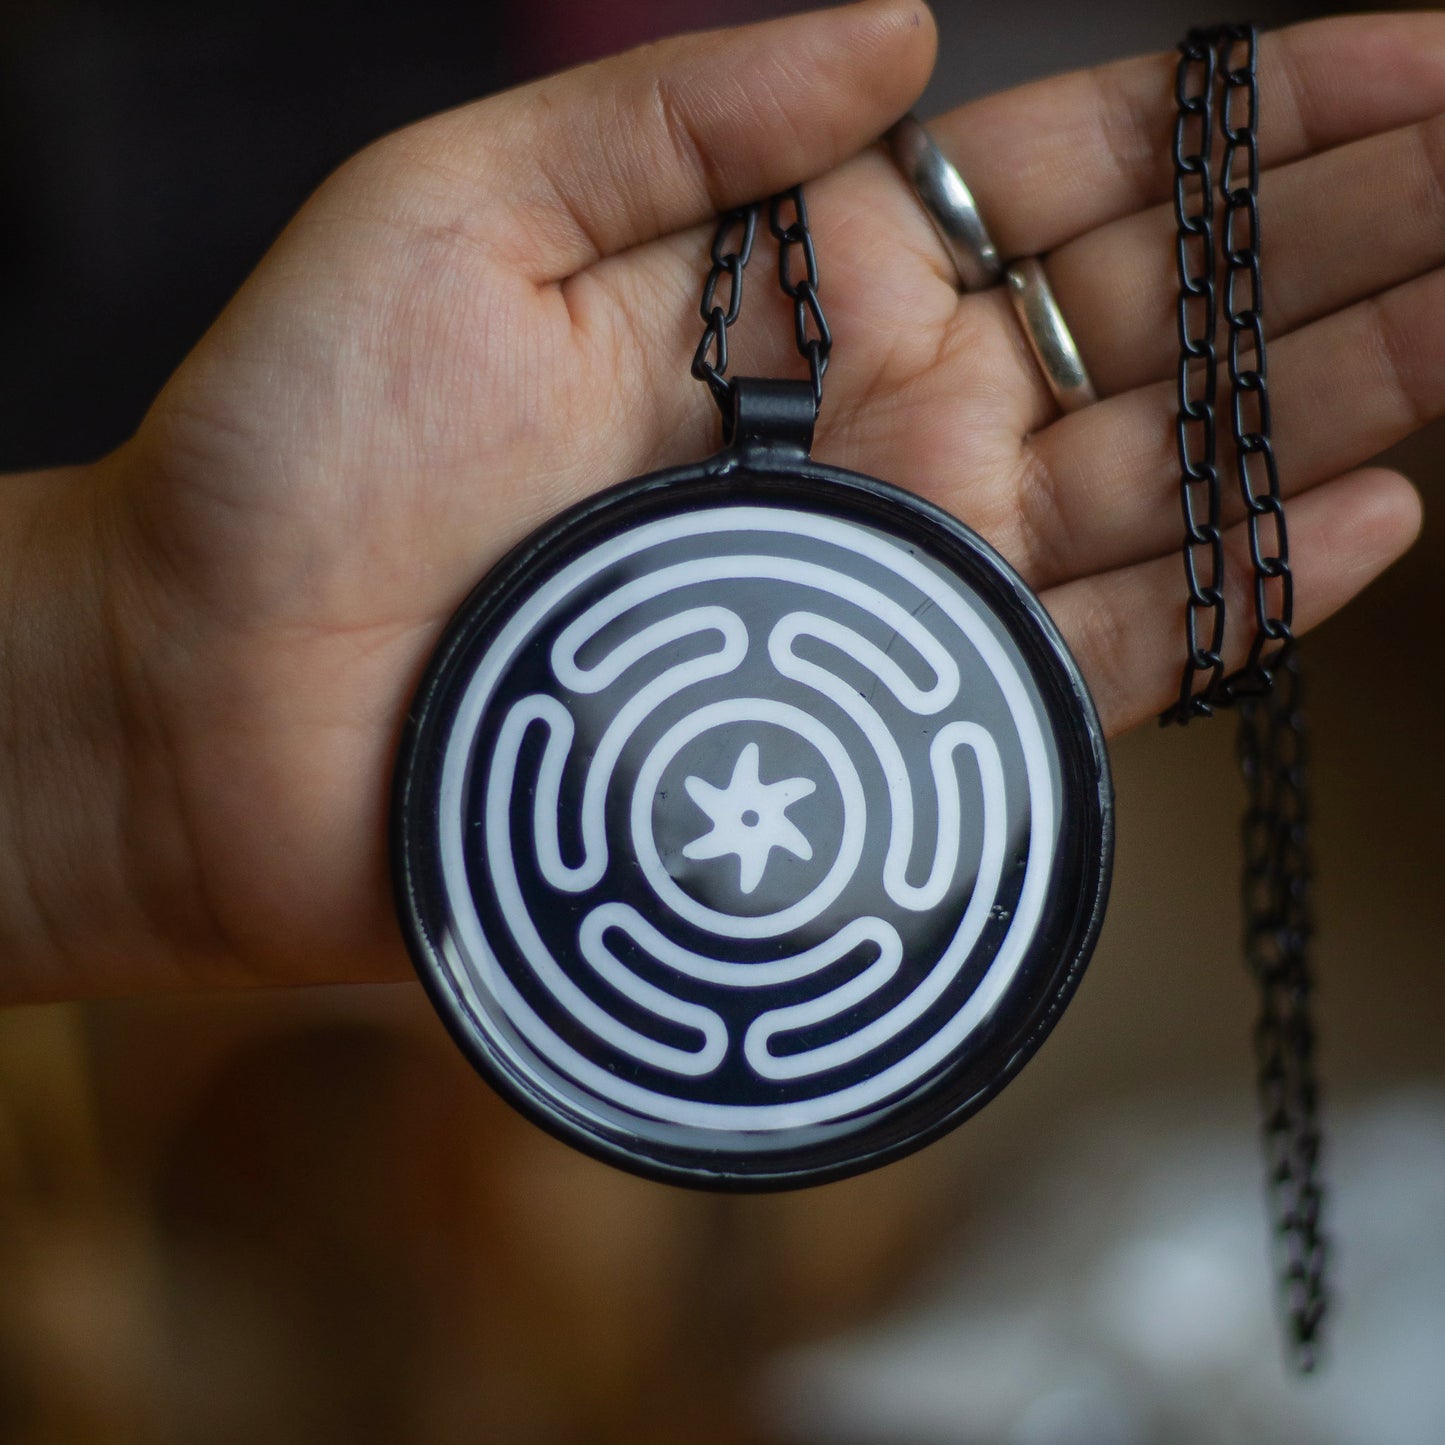 Goddess Hecate | Wheel of Hecate print Pendant with Chain